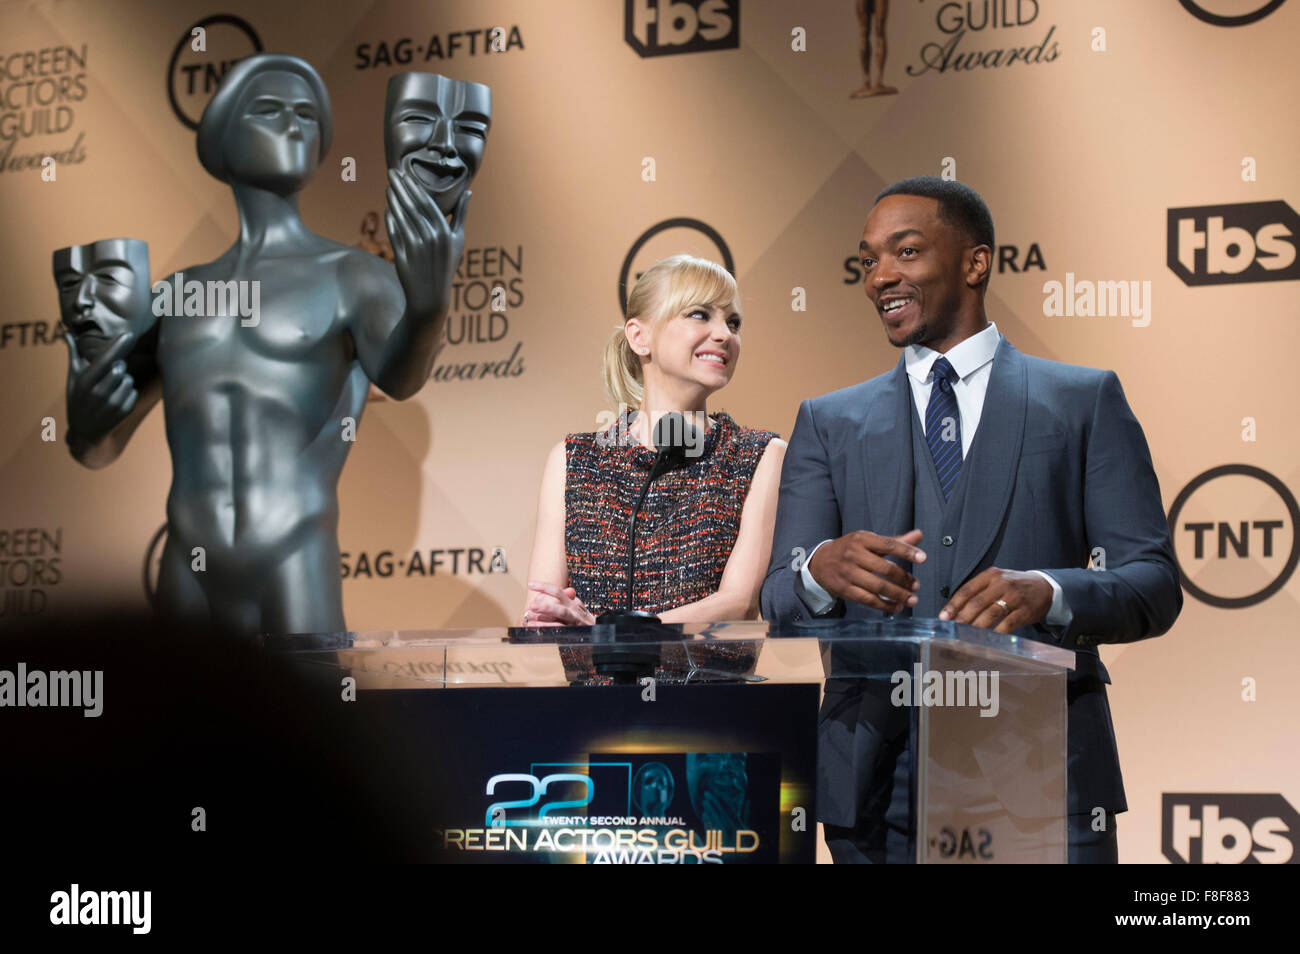 Los Angeles, California, USA. 9th December, 2015. Anthony Mackie (R) and Anna Faris announce the nominations for the 22nd Annual Screen Actors Guild (SAG) Awards in Los Angeles, the United States, Dec. 9, 2015. The 22nd Annual SAG Awards were announced this morning at the Pacific Design Center's SilverScreen in West Hollywood. The 22nd SAG will be simulcast on TNT and TBS on Saturday, Jan. 30, 2016. Credit:  Yang Lei/Xinhua/Alamy Live News Stock Photo